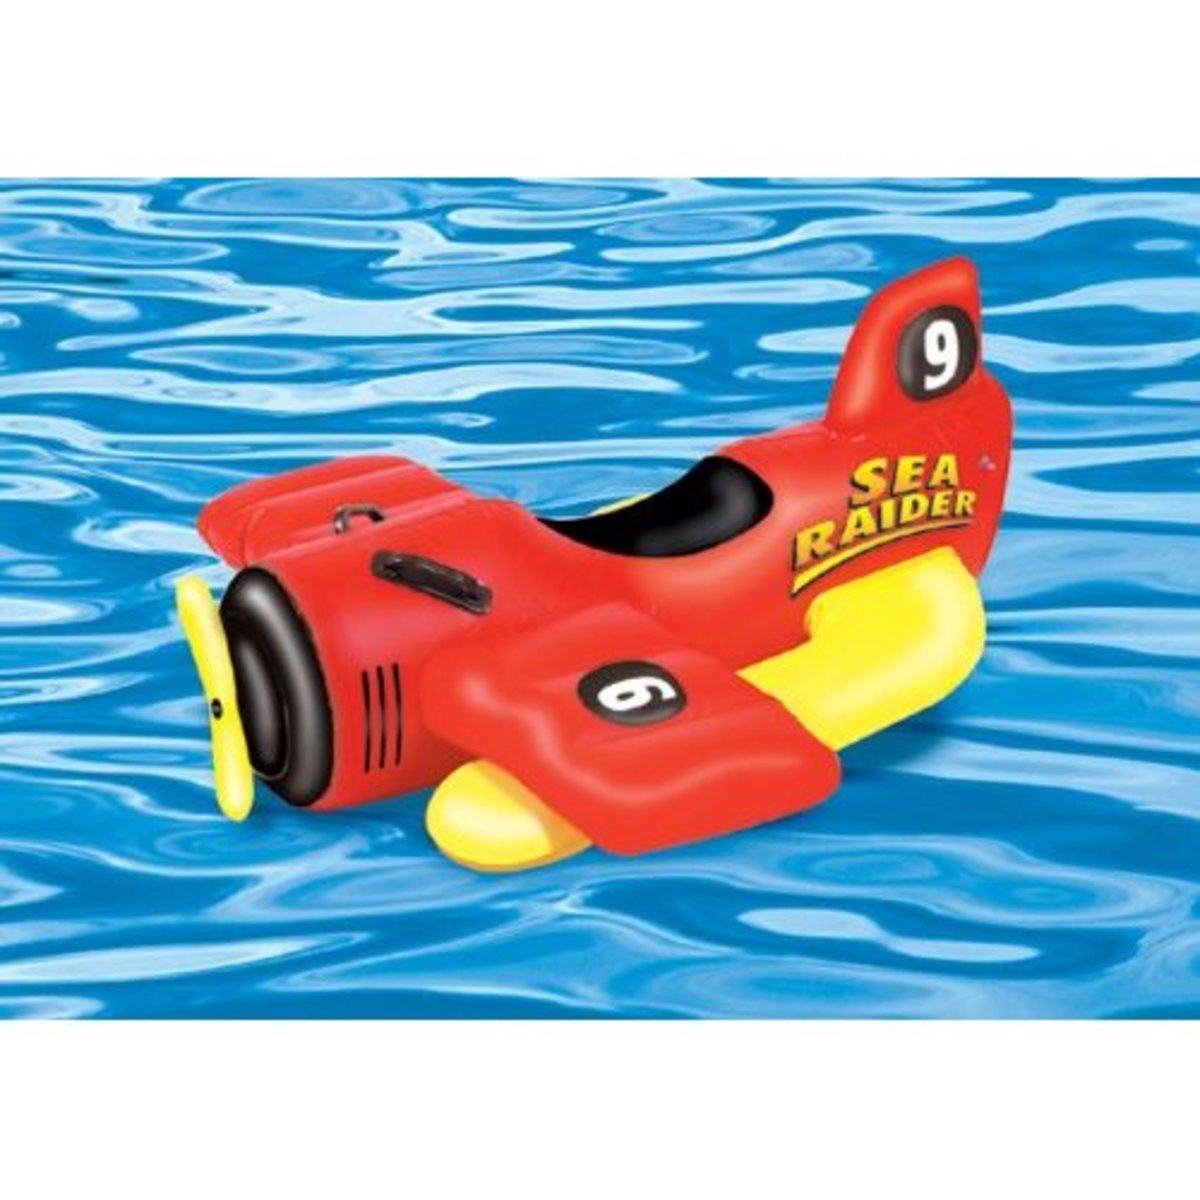 Kids' Pool Toys at Discount Prices!